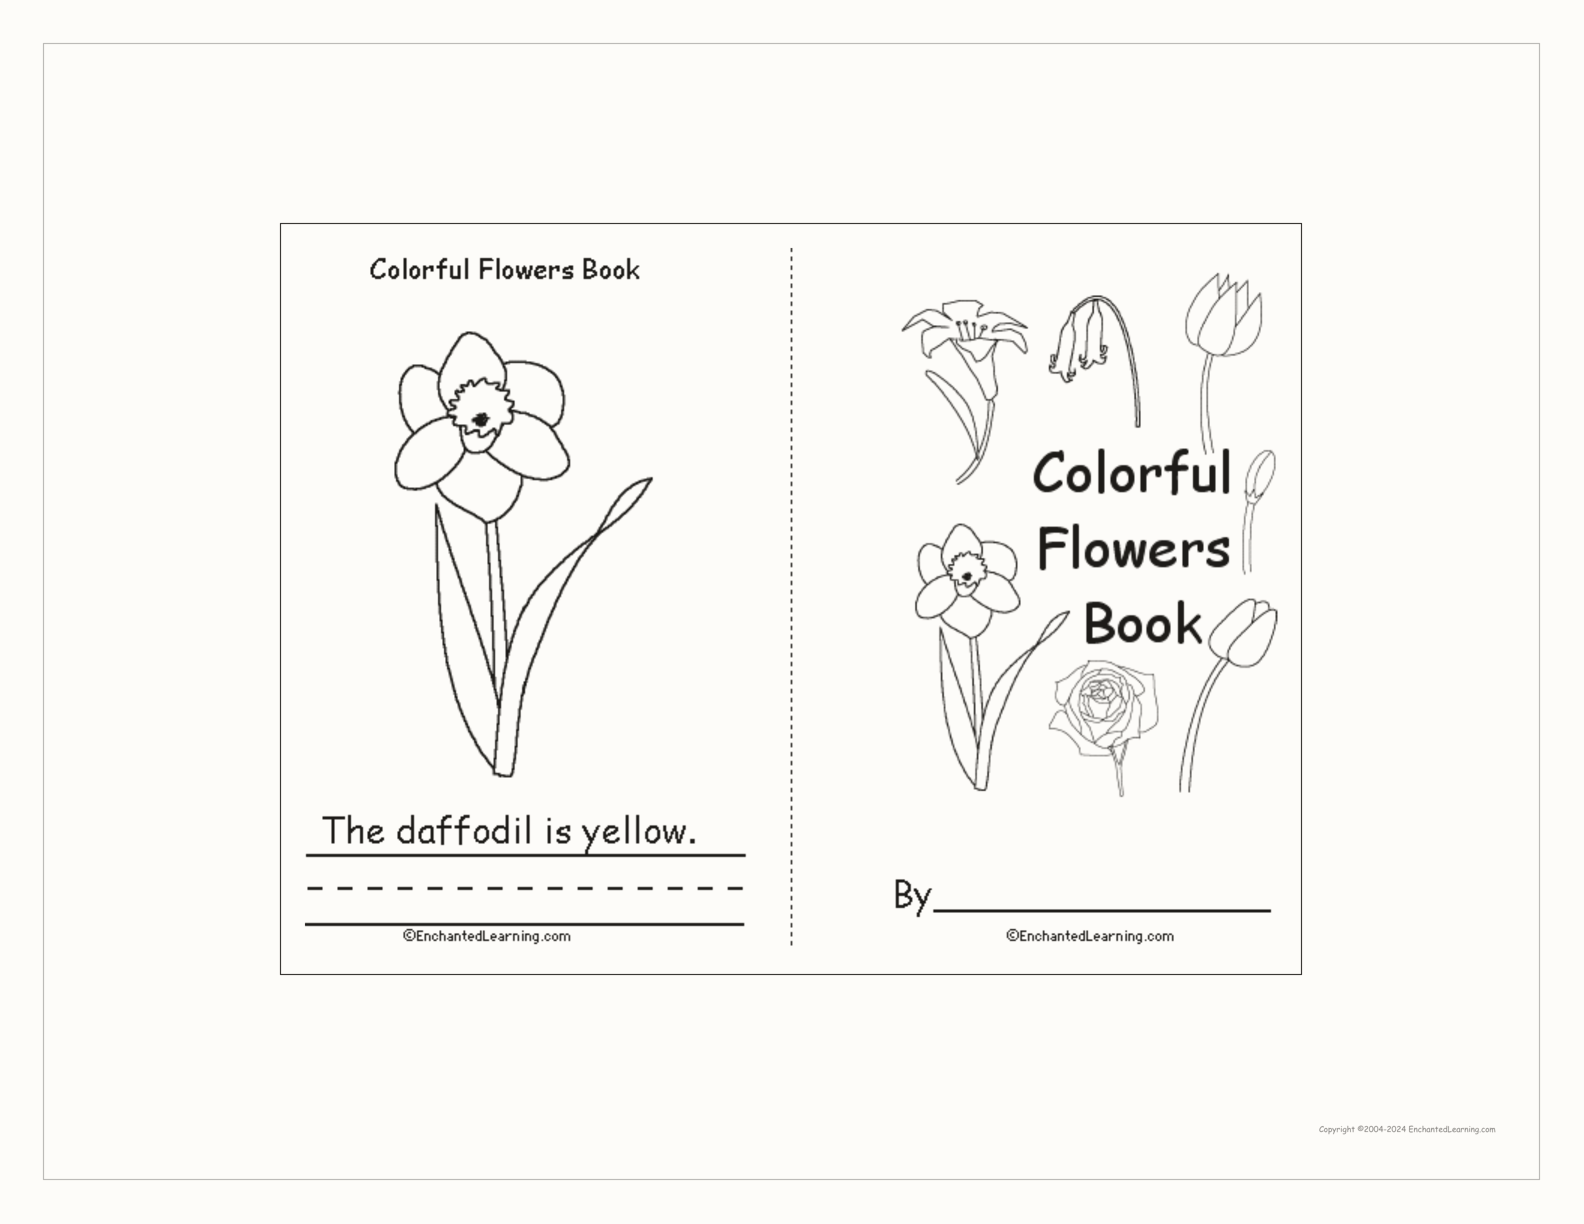 Colorful Flowers Book, A Printable Book interactive printout page 1